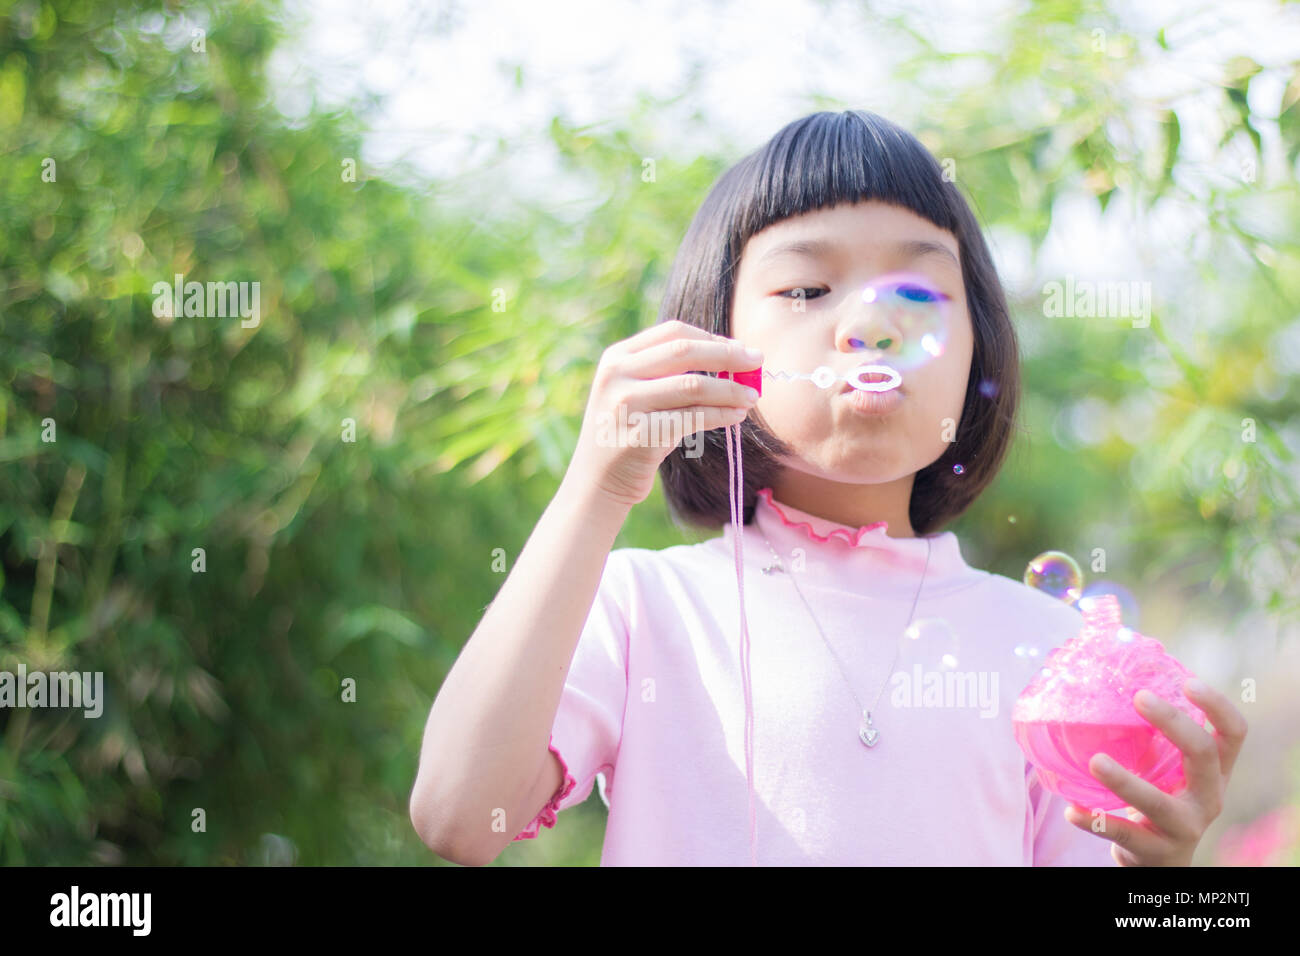 funny young girl blow bubbles in green garden Stock Photo